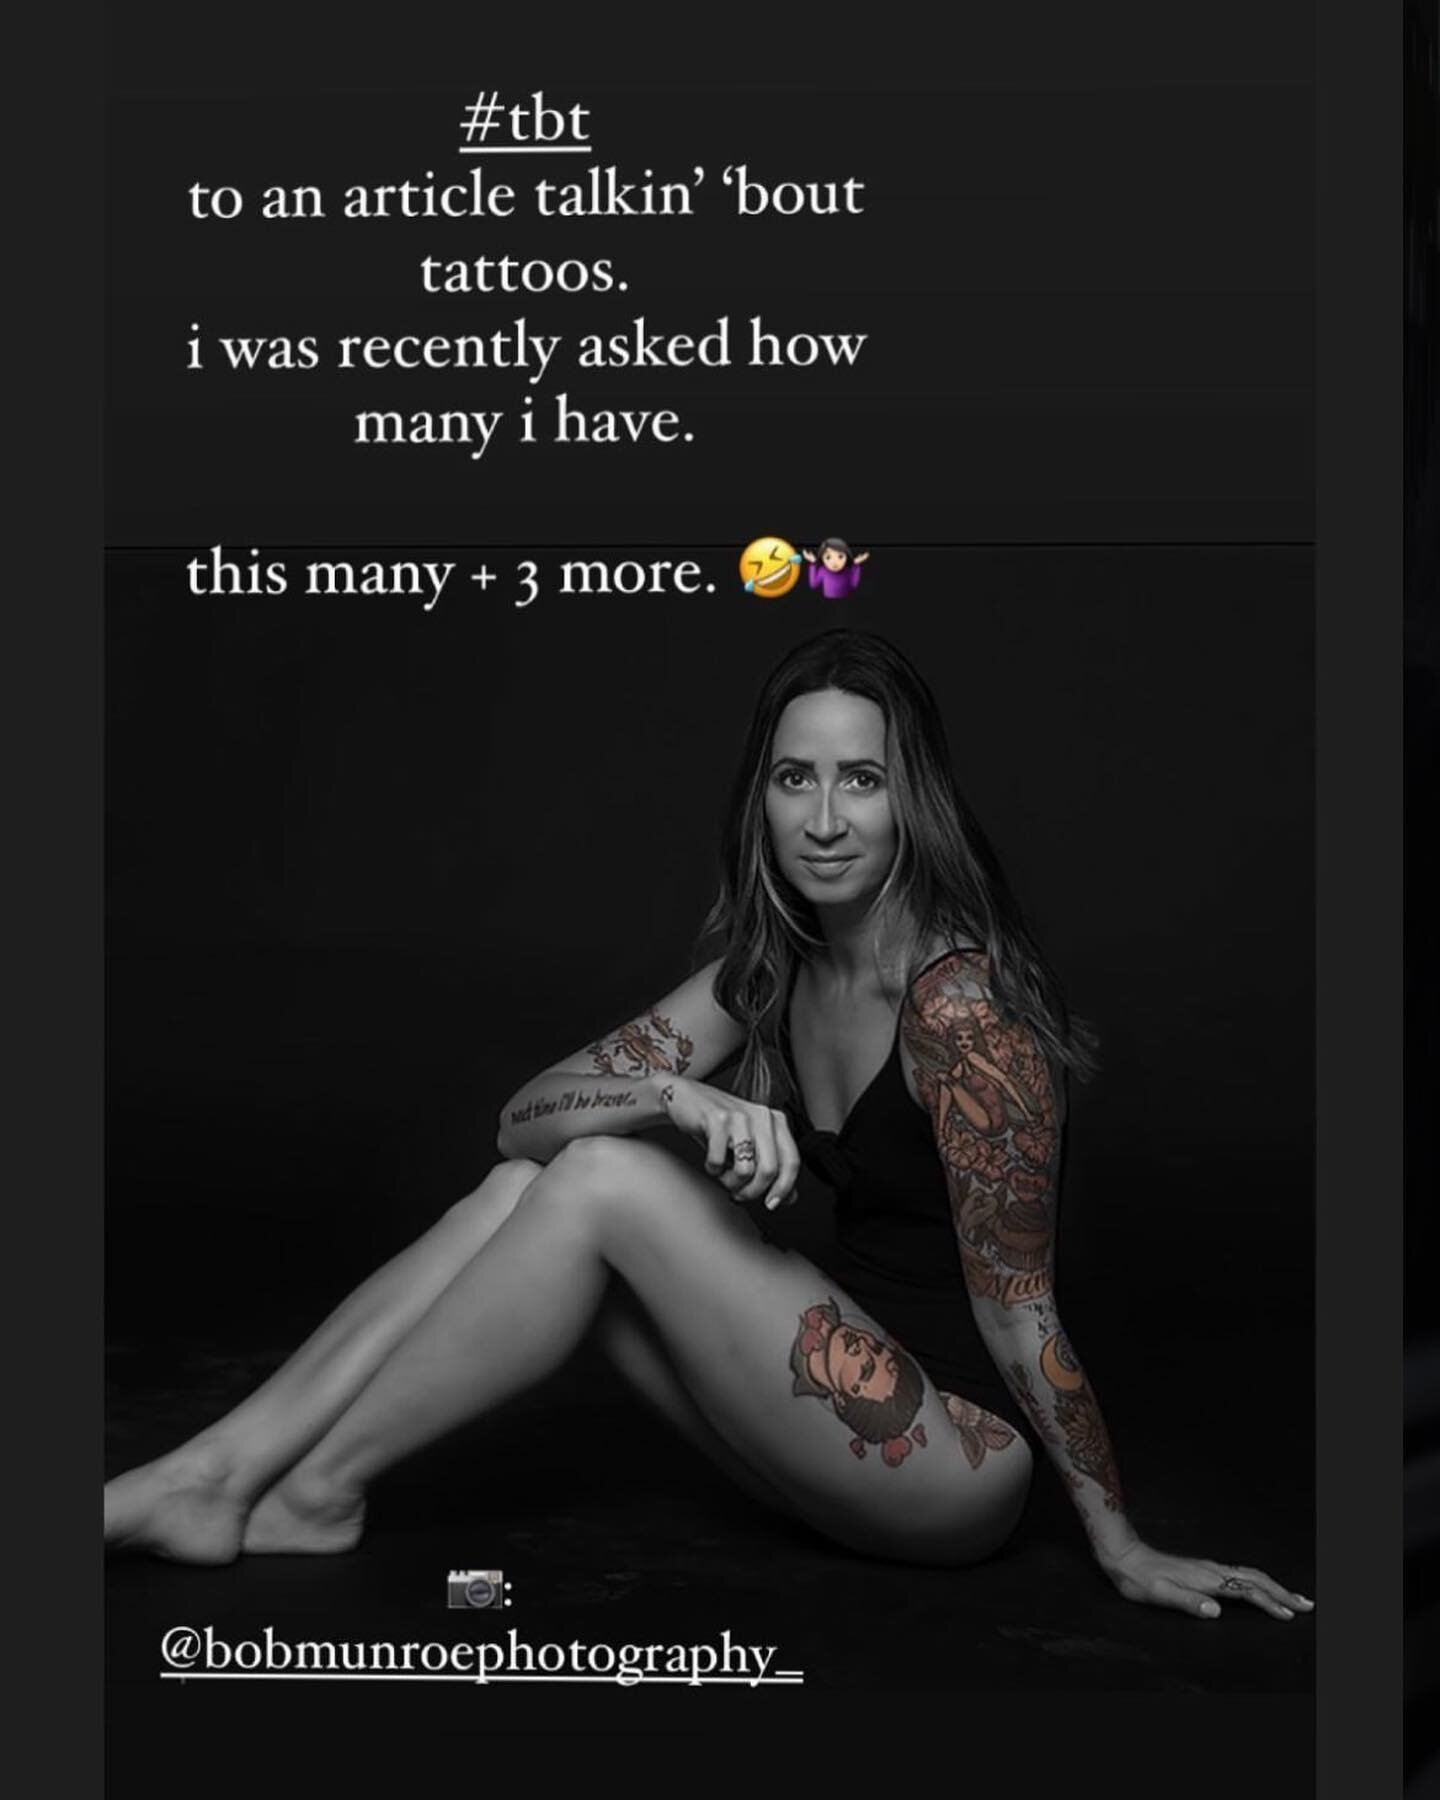 It was nice to see that &lsquo;This Is It Actually&rsquo; Podcaster Jeni Besworth, used a 2017 photo I took of her. She discusses her passion for tattoos on her podcast from July 23, 2020. #tattoos #nikonphotography #nikond810 #nikoncanada #studiopho